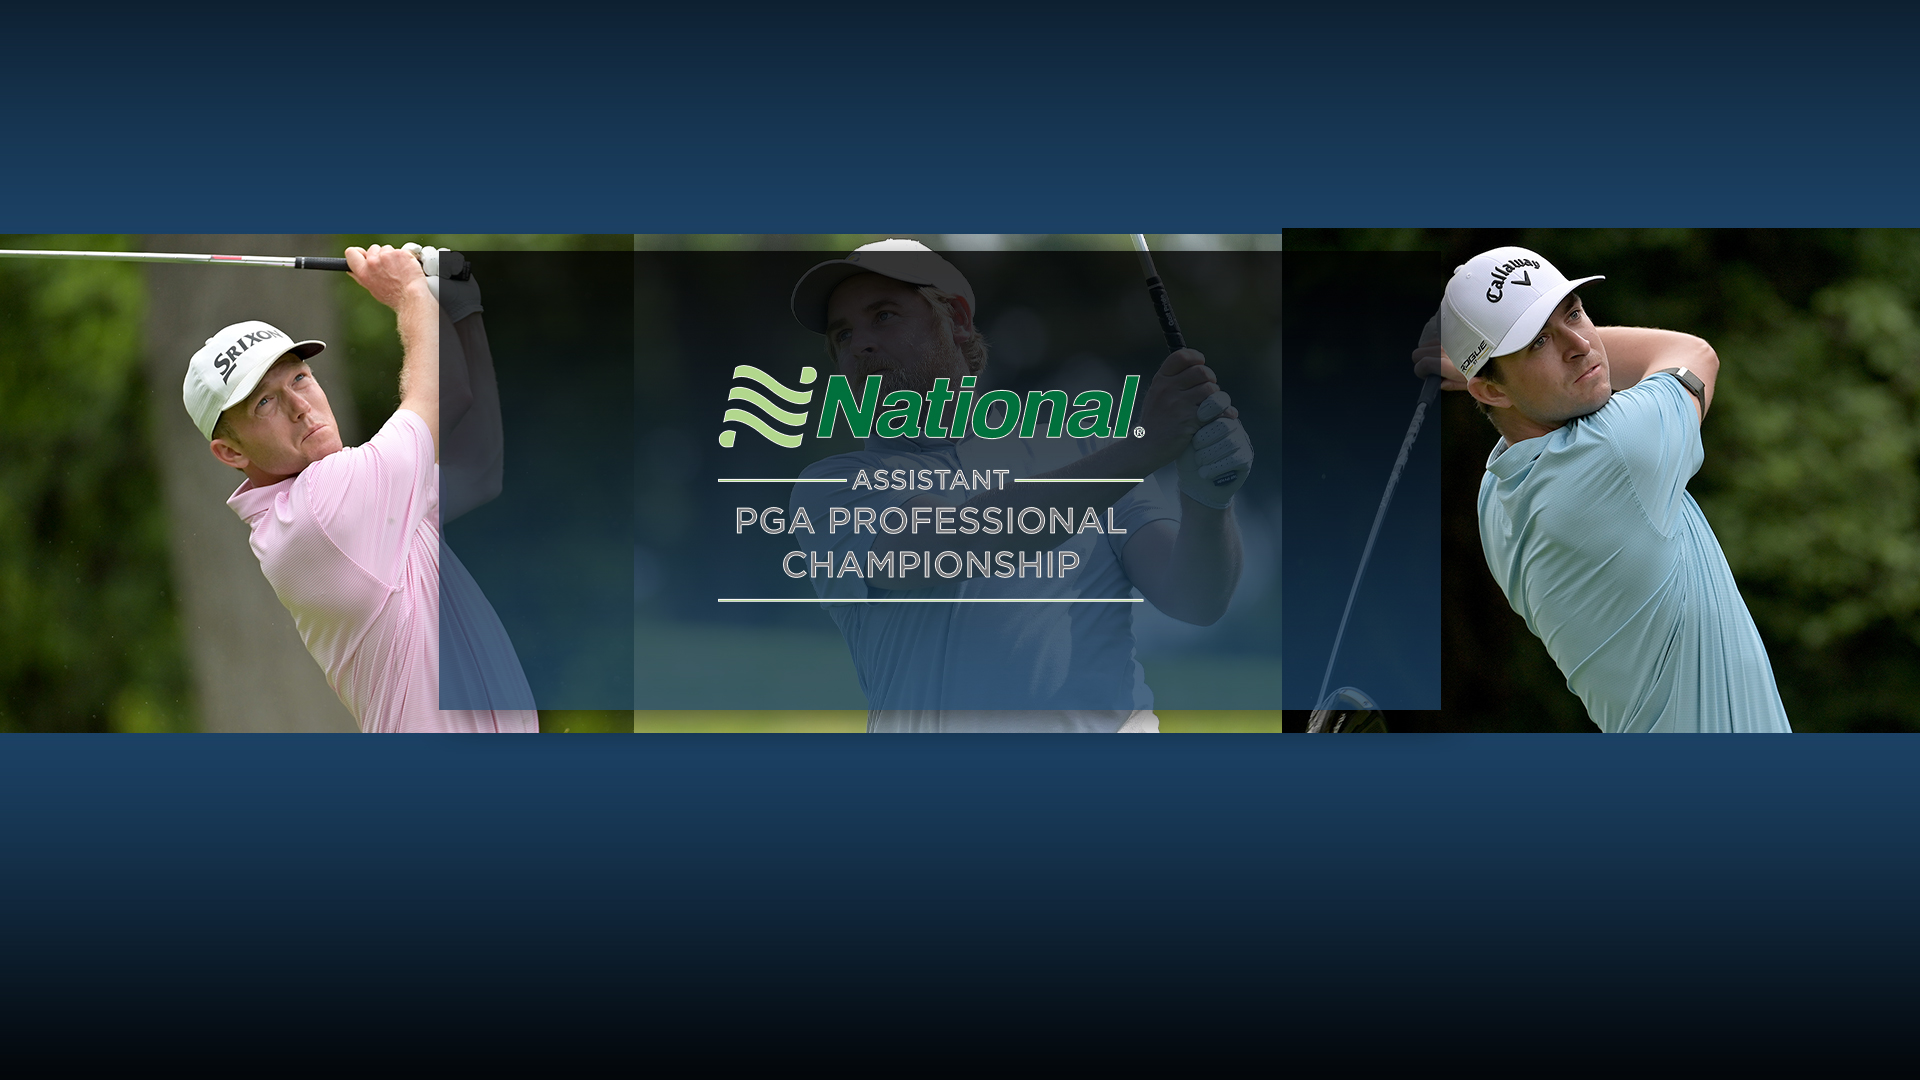 Flack, French, and Schlimm to Compete in National Car Rental Assistant PGA Professional Championship